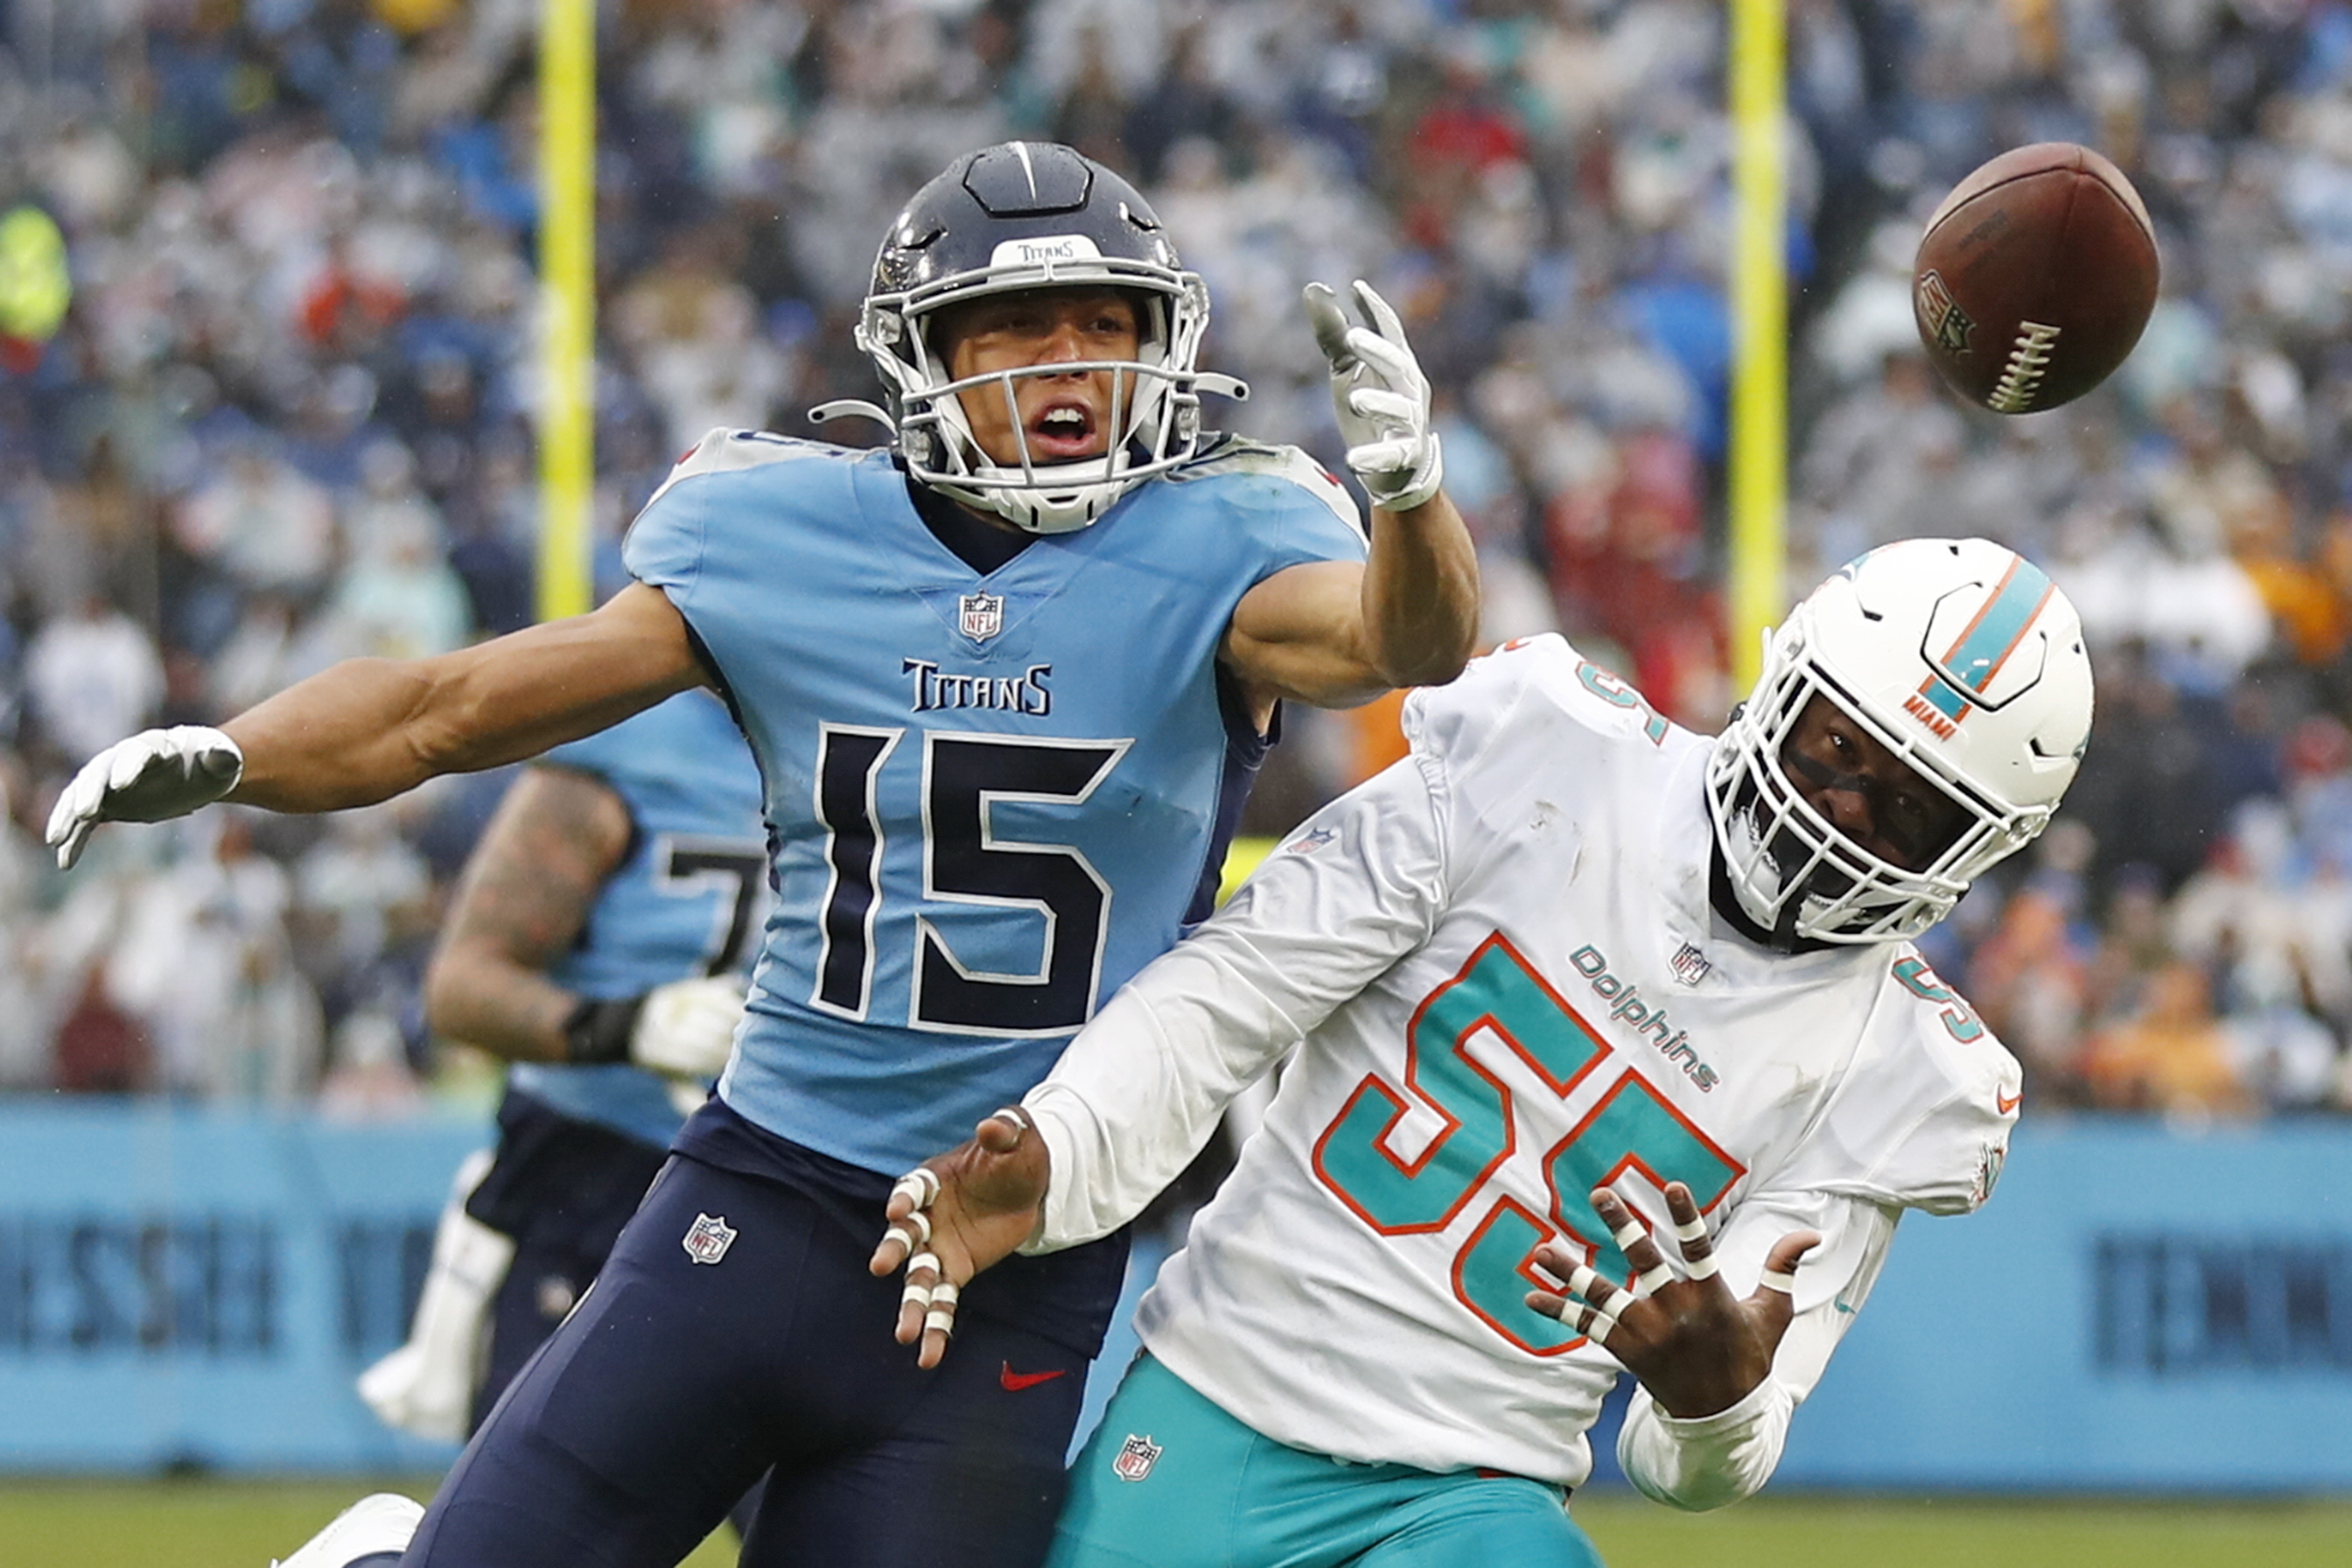 Titans clinch 2nd straight AFC South, beating Miami 34-3